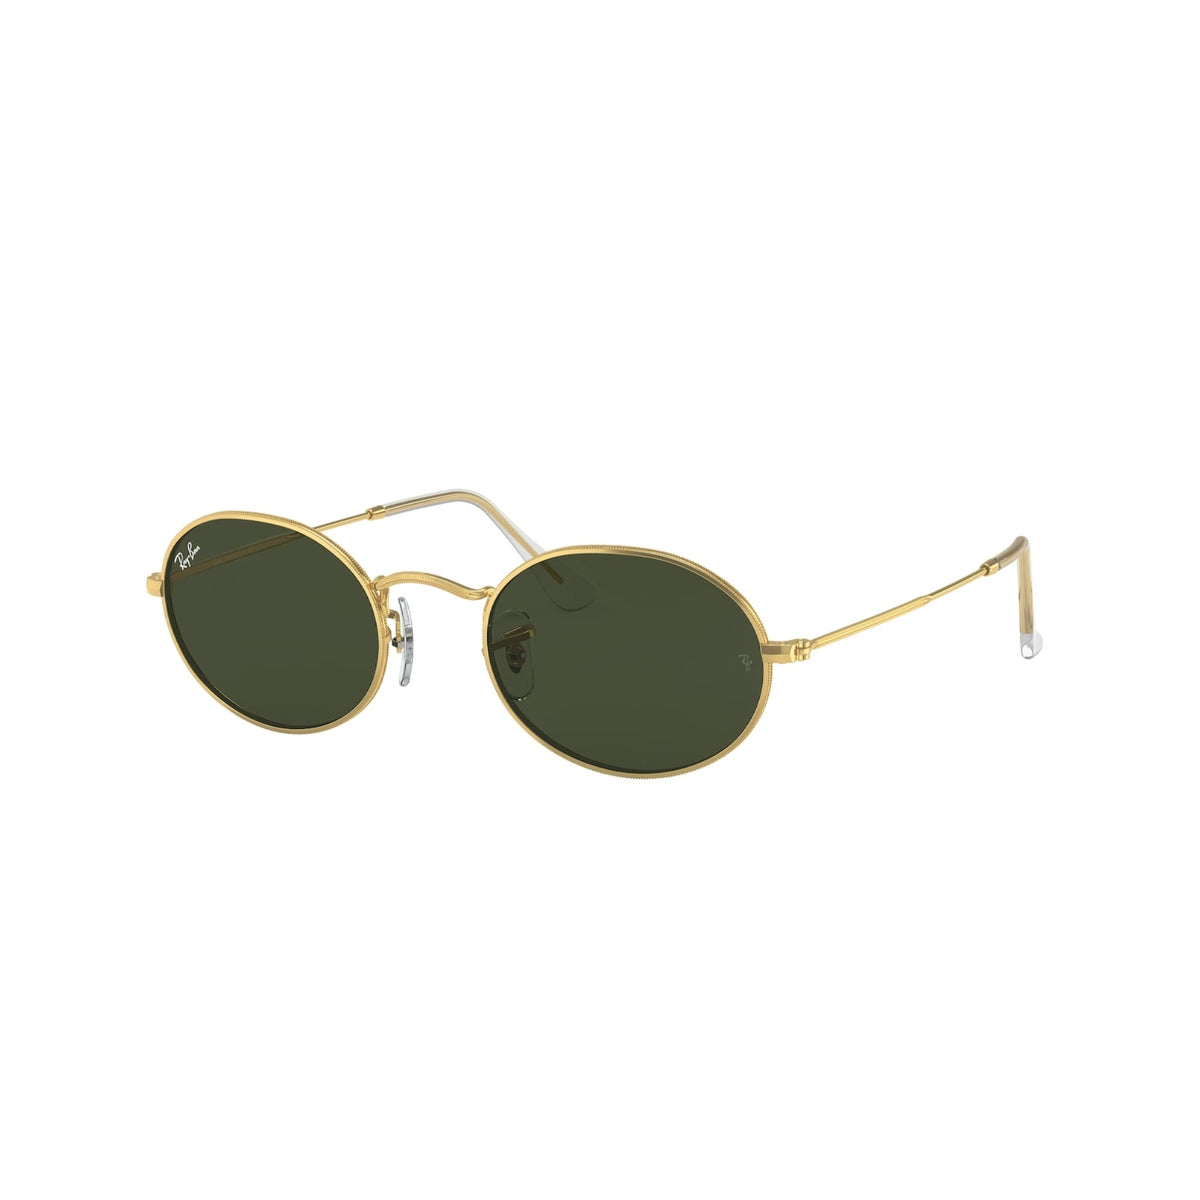 Ray-Ban Unisex Sunglasses Oval Gold G-15 Green Metal Metal  0RB3547 919631 51